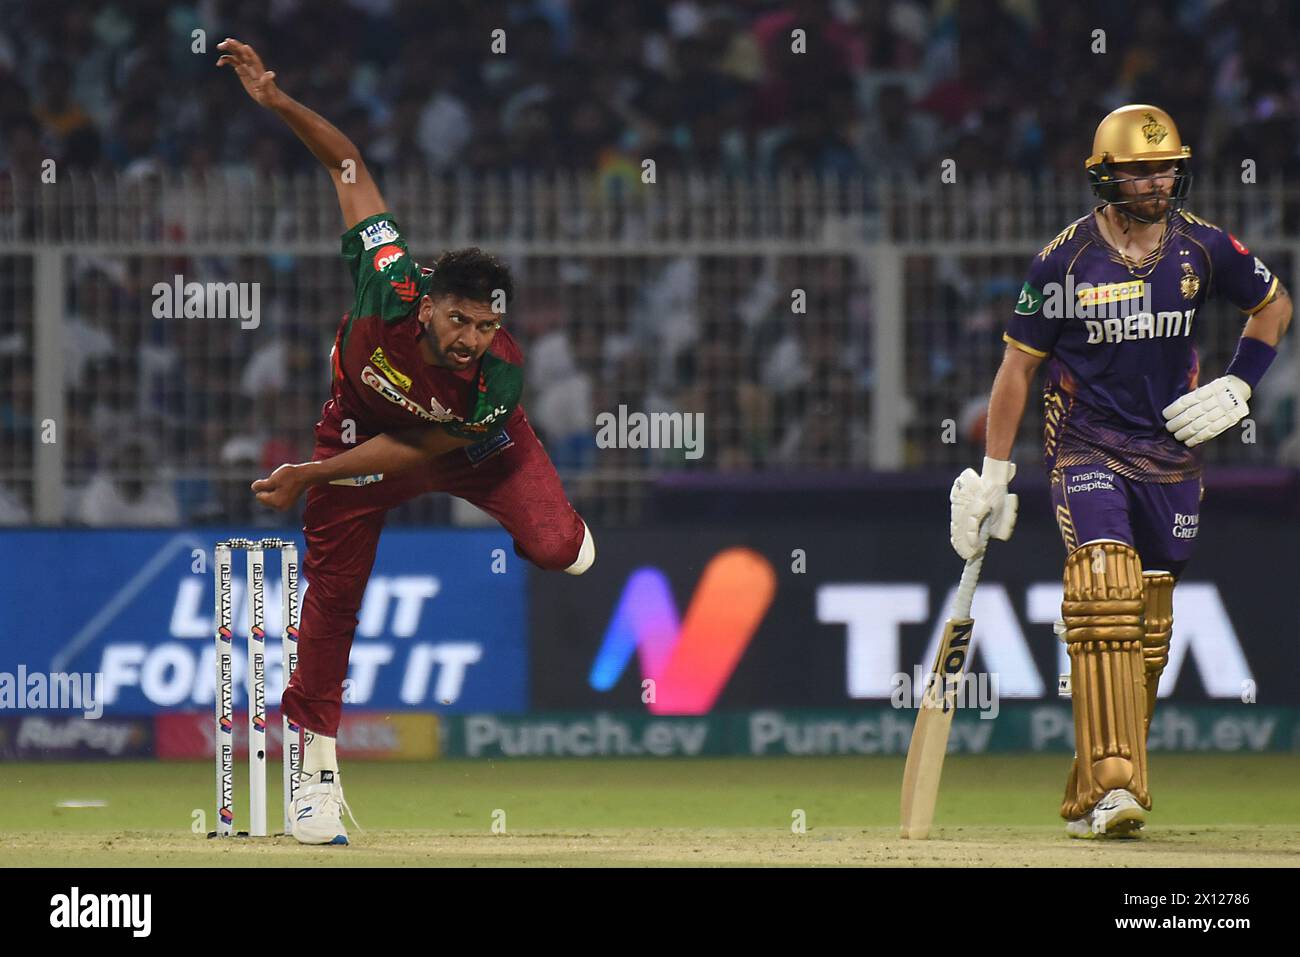 Lucknow Super Giants' Mohsin Khan delivers a ball  during the Indian Premier League (IPL) Twenty 20 cricket match between Kolkata Knight Riders and Lucknow Super Giants at the Eden GardensKolkata Knight Riders beat Lucknow Super Giants by 8 wickets Stock Photo